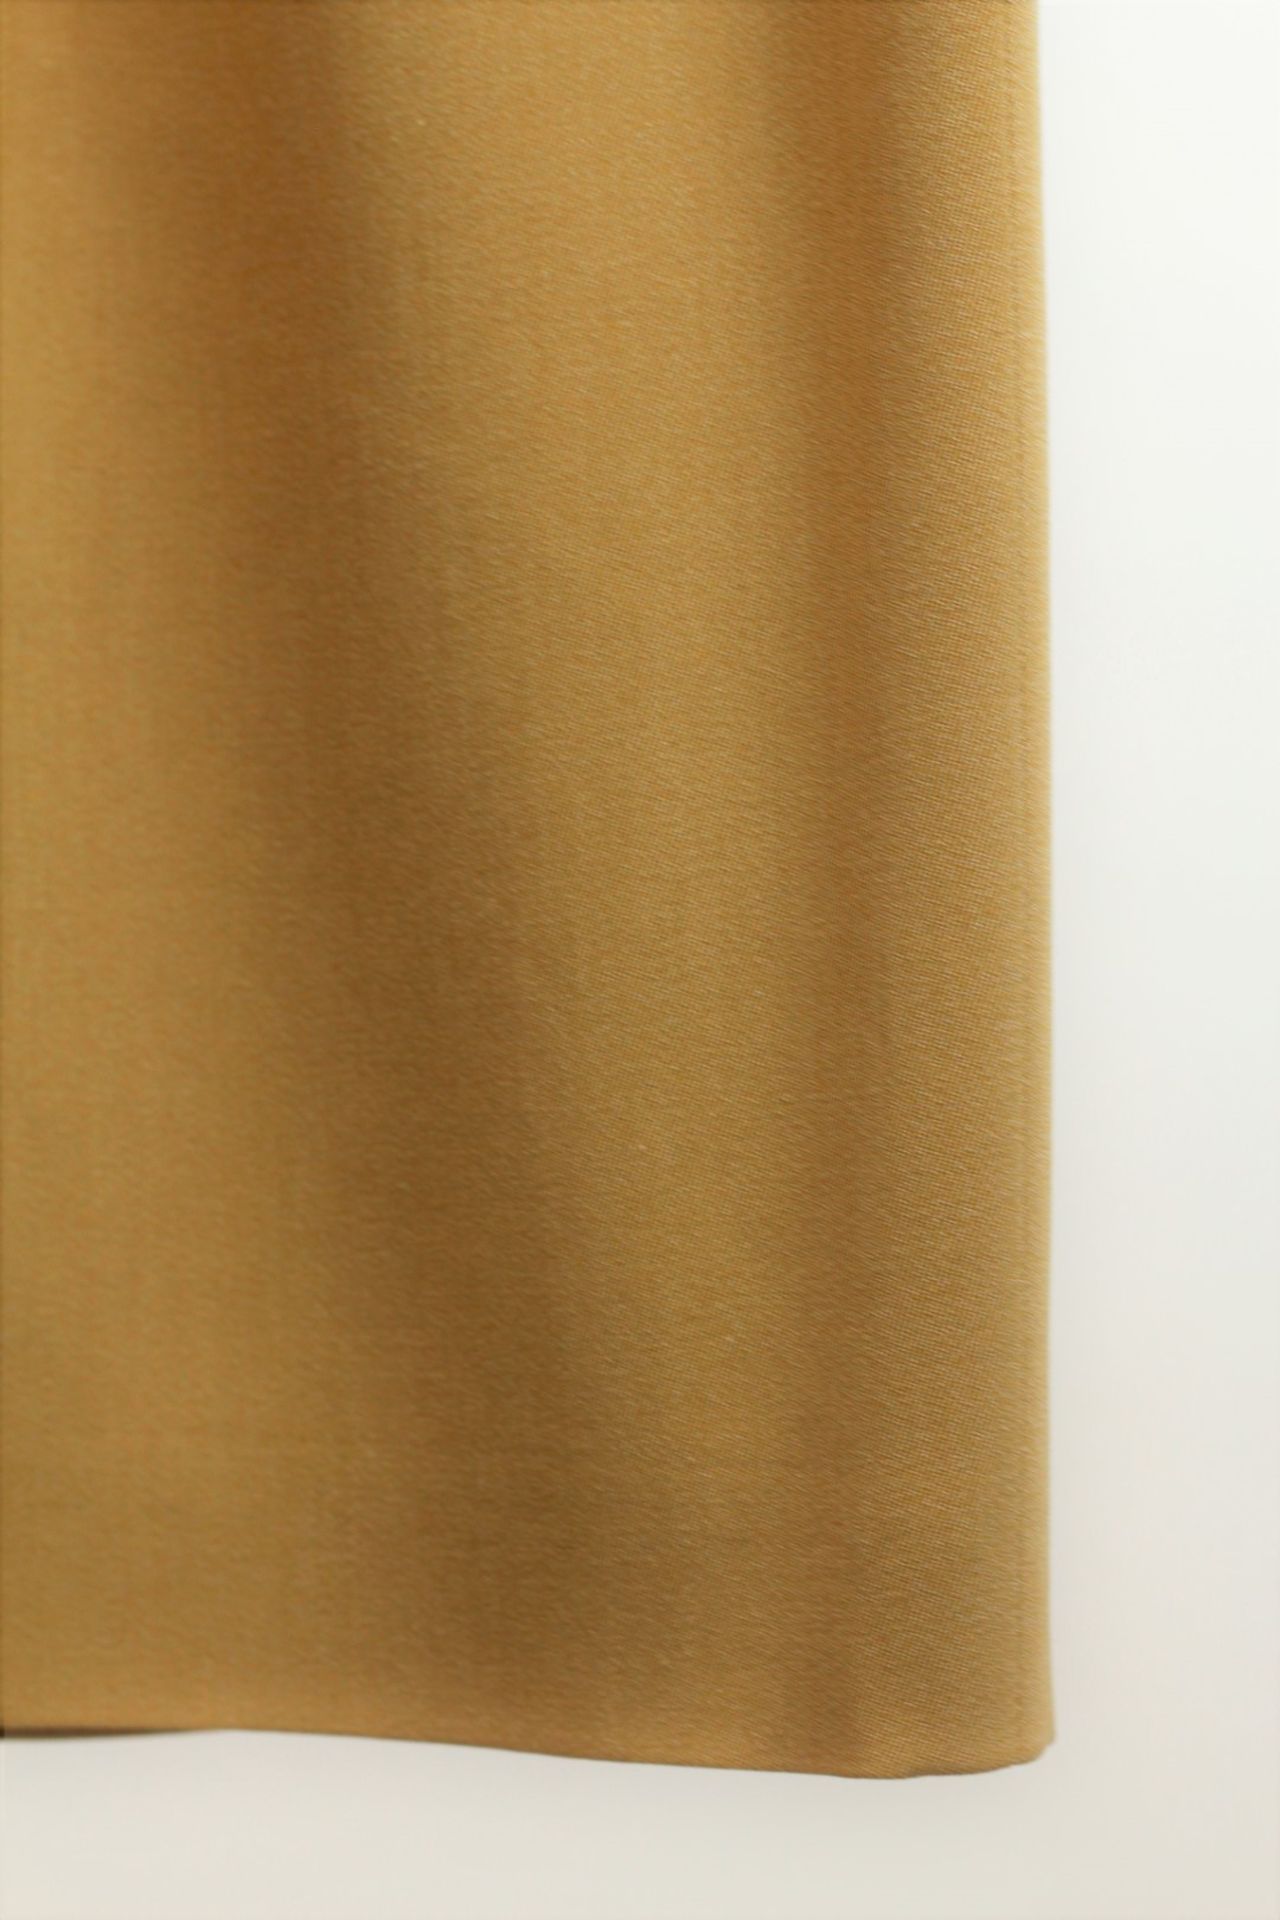 1 x Belvest Mustard Skirt - Size: 18 - Material: 75% Wool 25% Cotton. Lining 100% Rayon - From a - Image 7 of 7